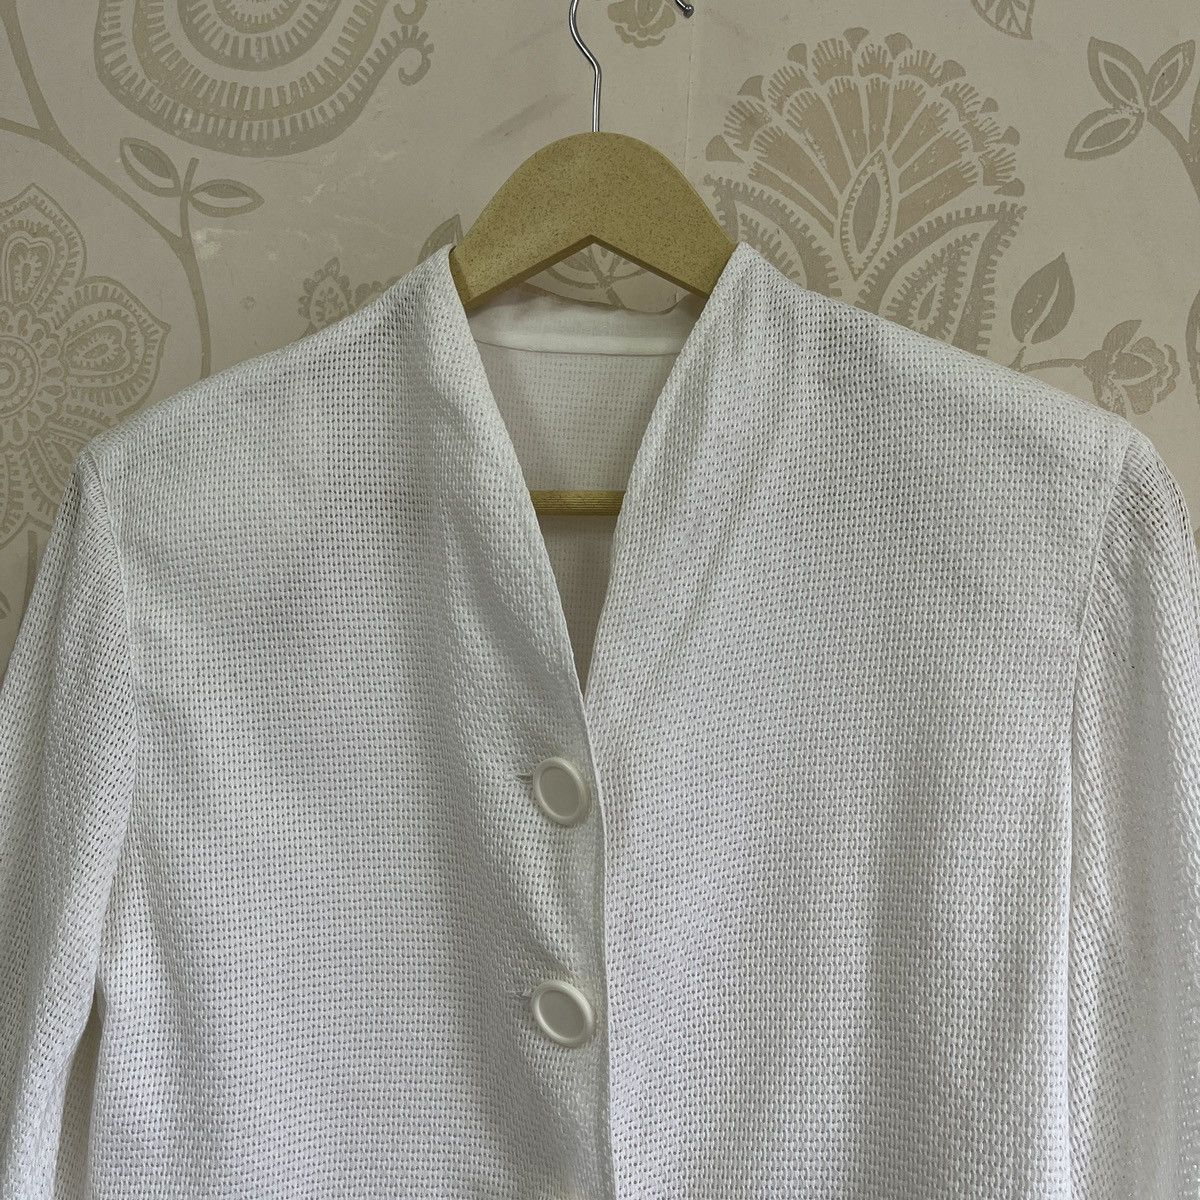 Gently Used Vintage Christian Dior Blouse Size M - 23